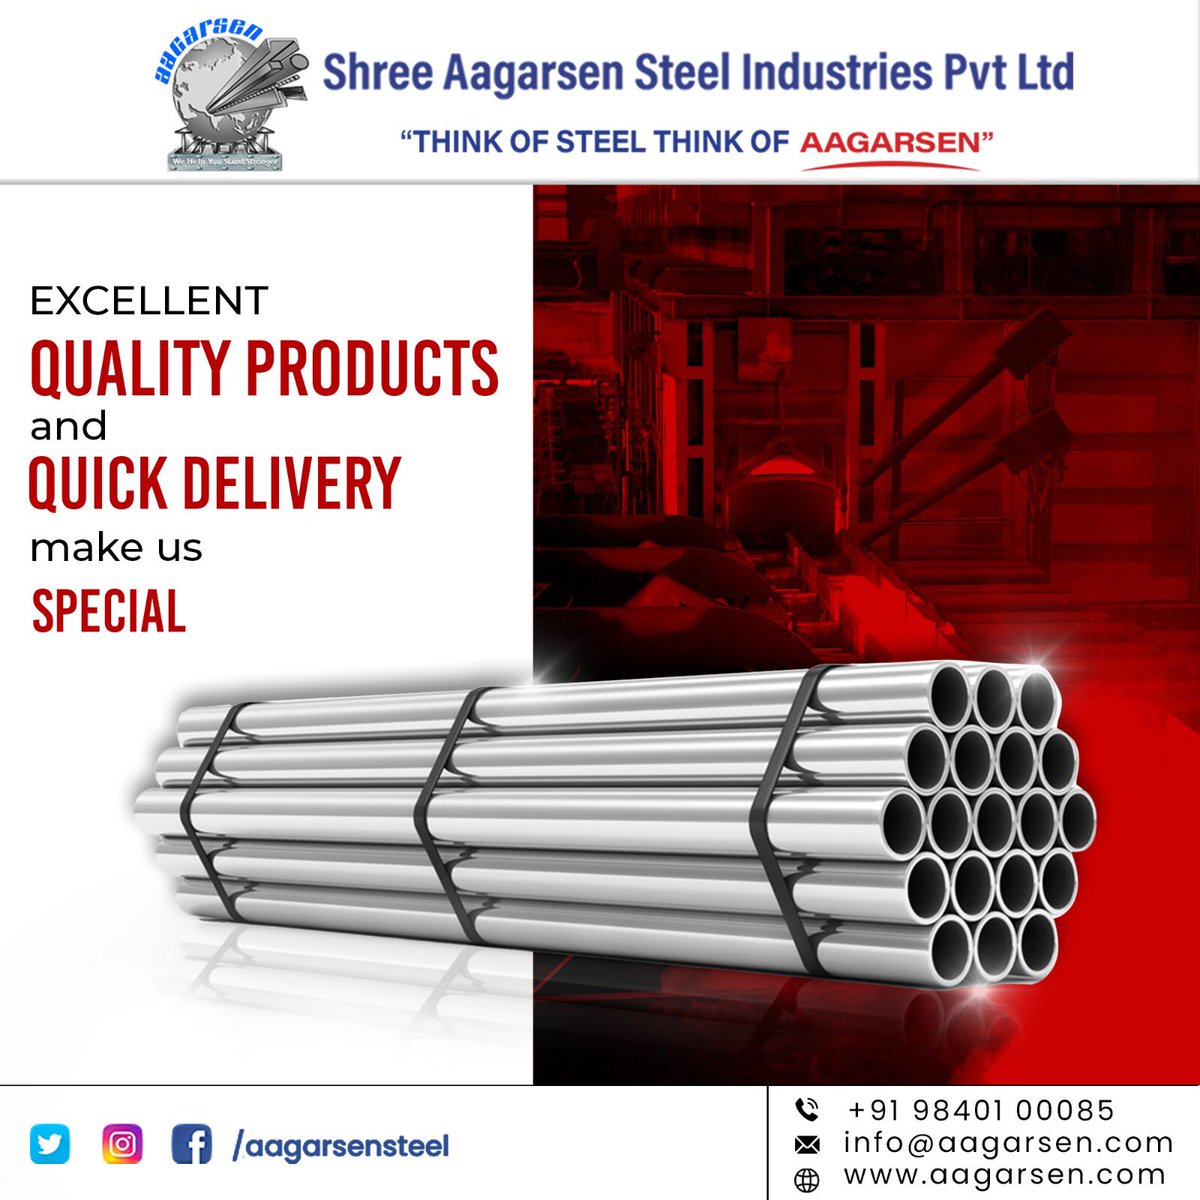 'Experience the excellence of quality!
.
THINK OF STEEL, THINK OF AAGARSEN!!!
.
To Order @98401 00085
Discover more:
buff.ly/3tF7P5W
.
#steel #steelindustry #trend #steelworks #steelbook #SteelQuality #TopNotchSteel #PremiumSteel #QuickDelivery #FastShipping